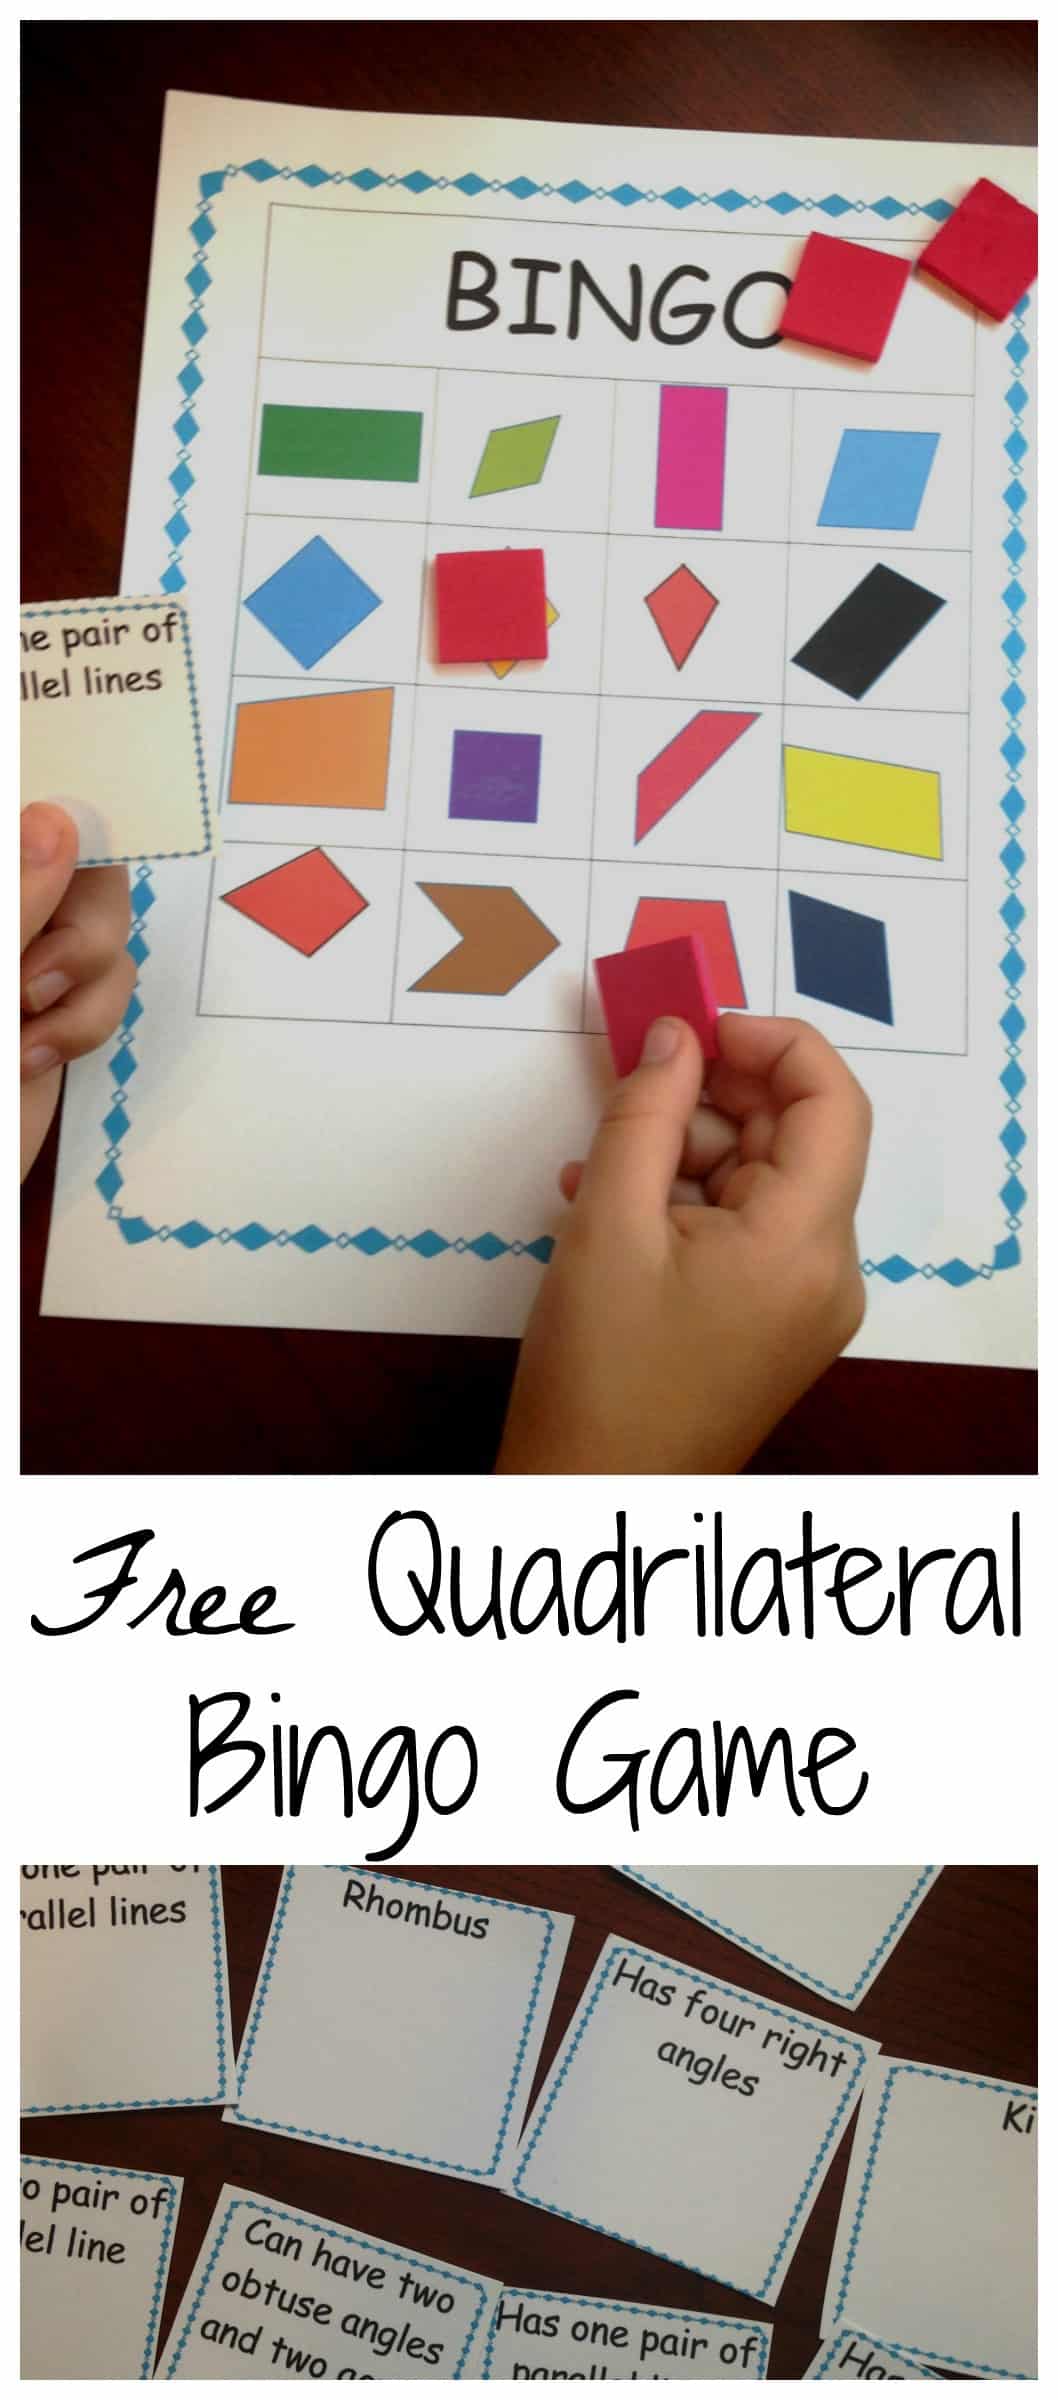 Quadrilateral bingo with a child's hands holding game pieces.